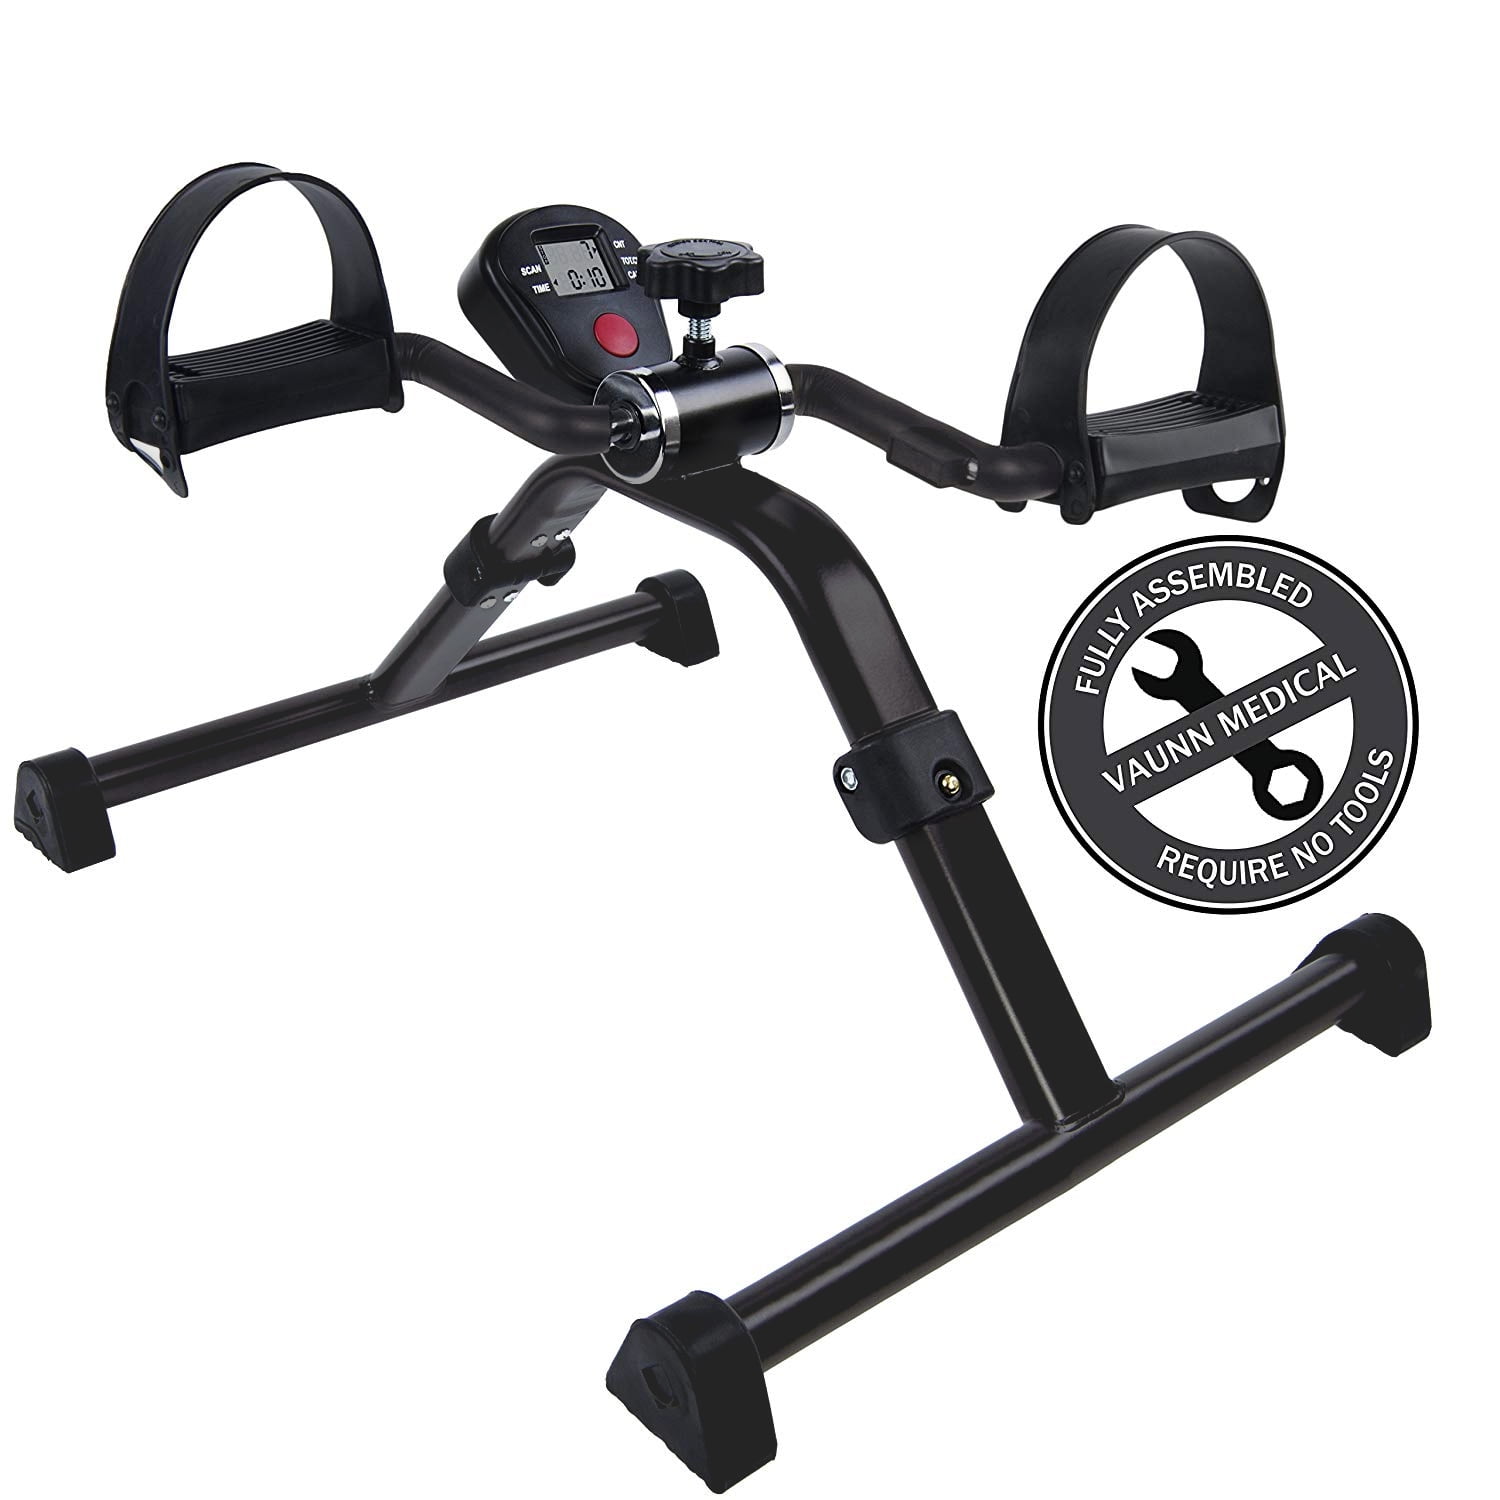 Fully Assembled Folding Exercise Pedaler, no Tools Required Vaunn Medical Under Desk Bike Pedal Exerciser with Electronic Display for Legs and Arms Workout 